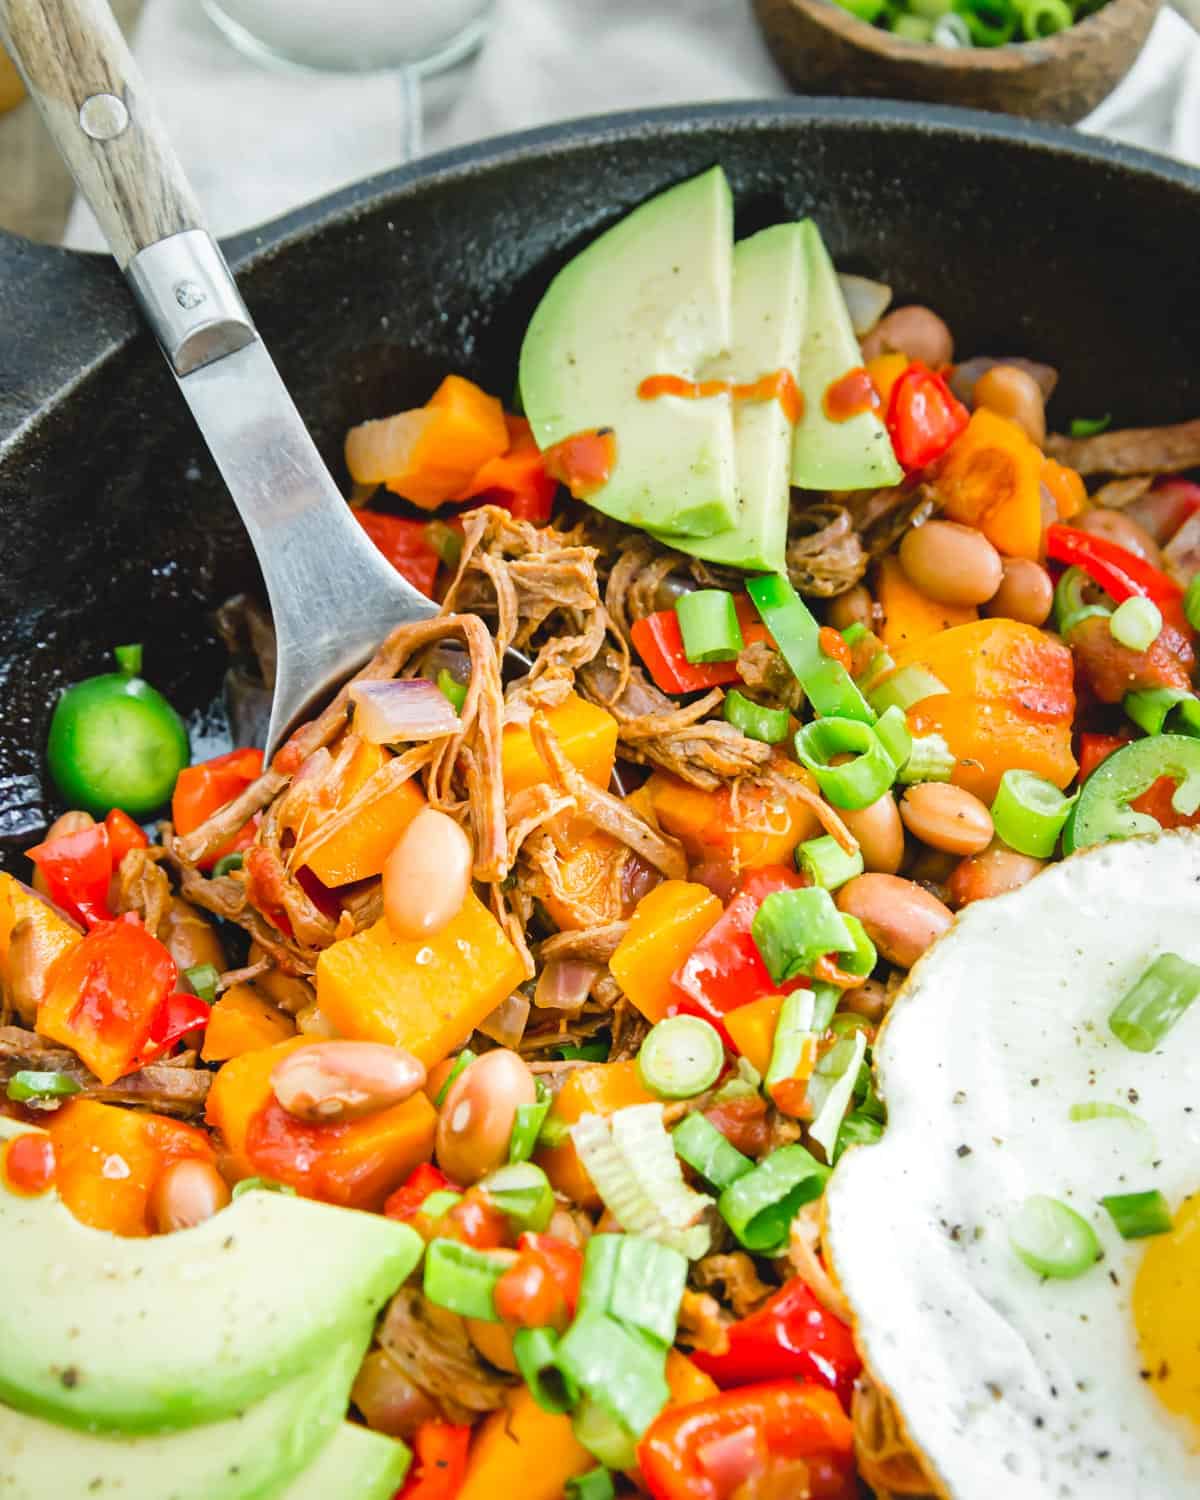 Leftover beef brisket is turned into an easy skillet breakfast hash recipe.